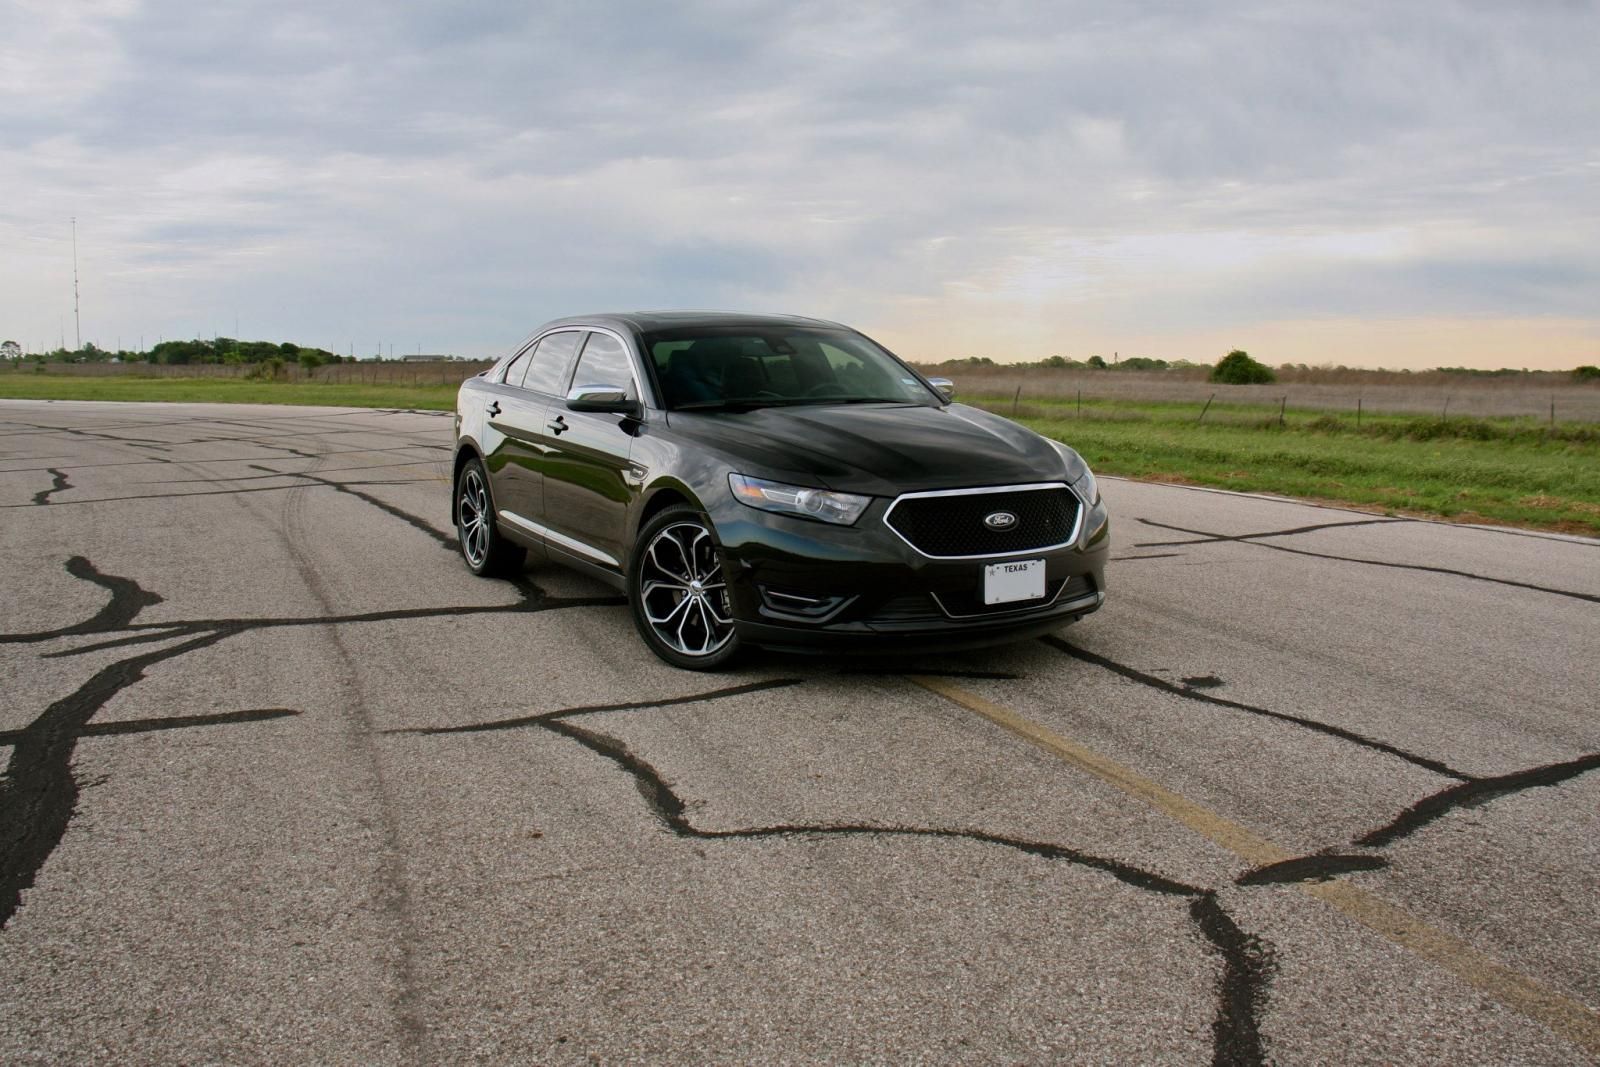 2013 Ford Taurus SHO by Hennessey